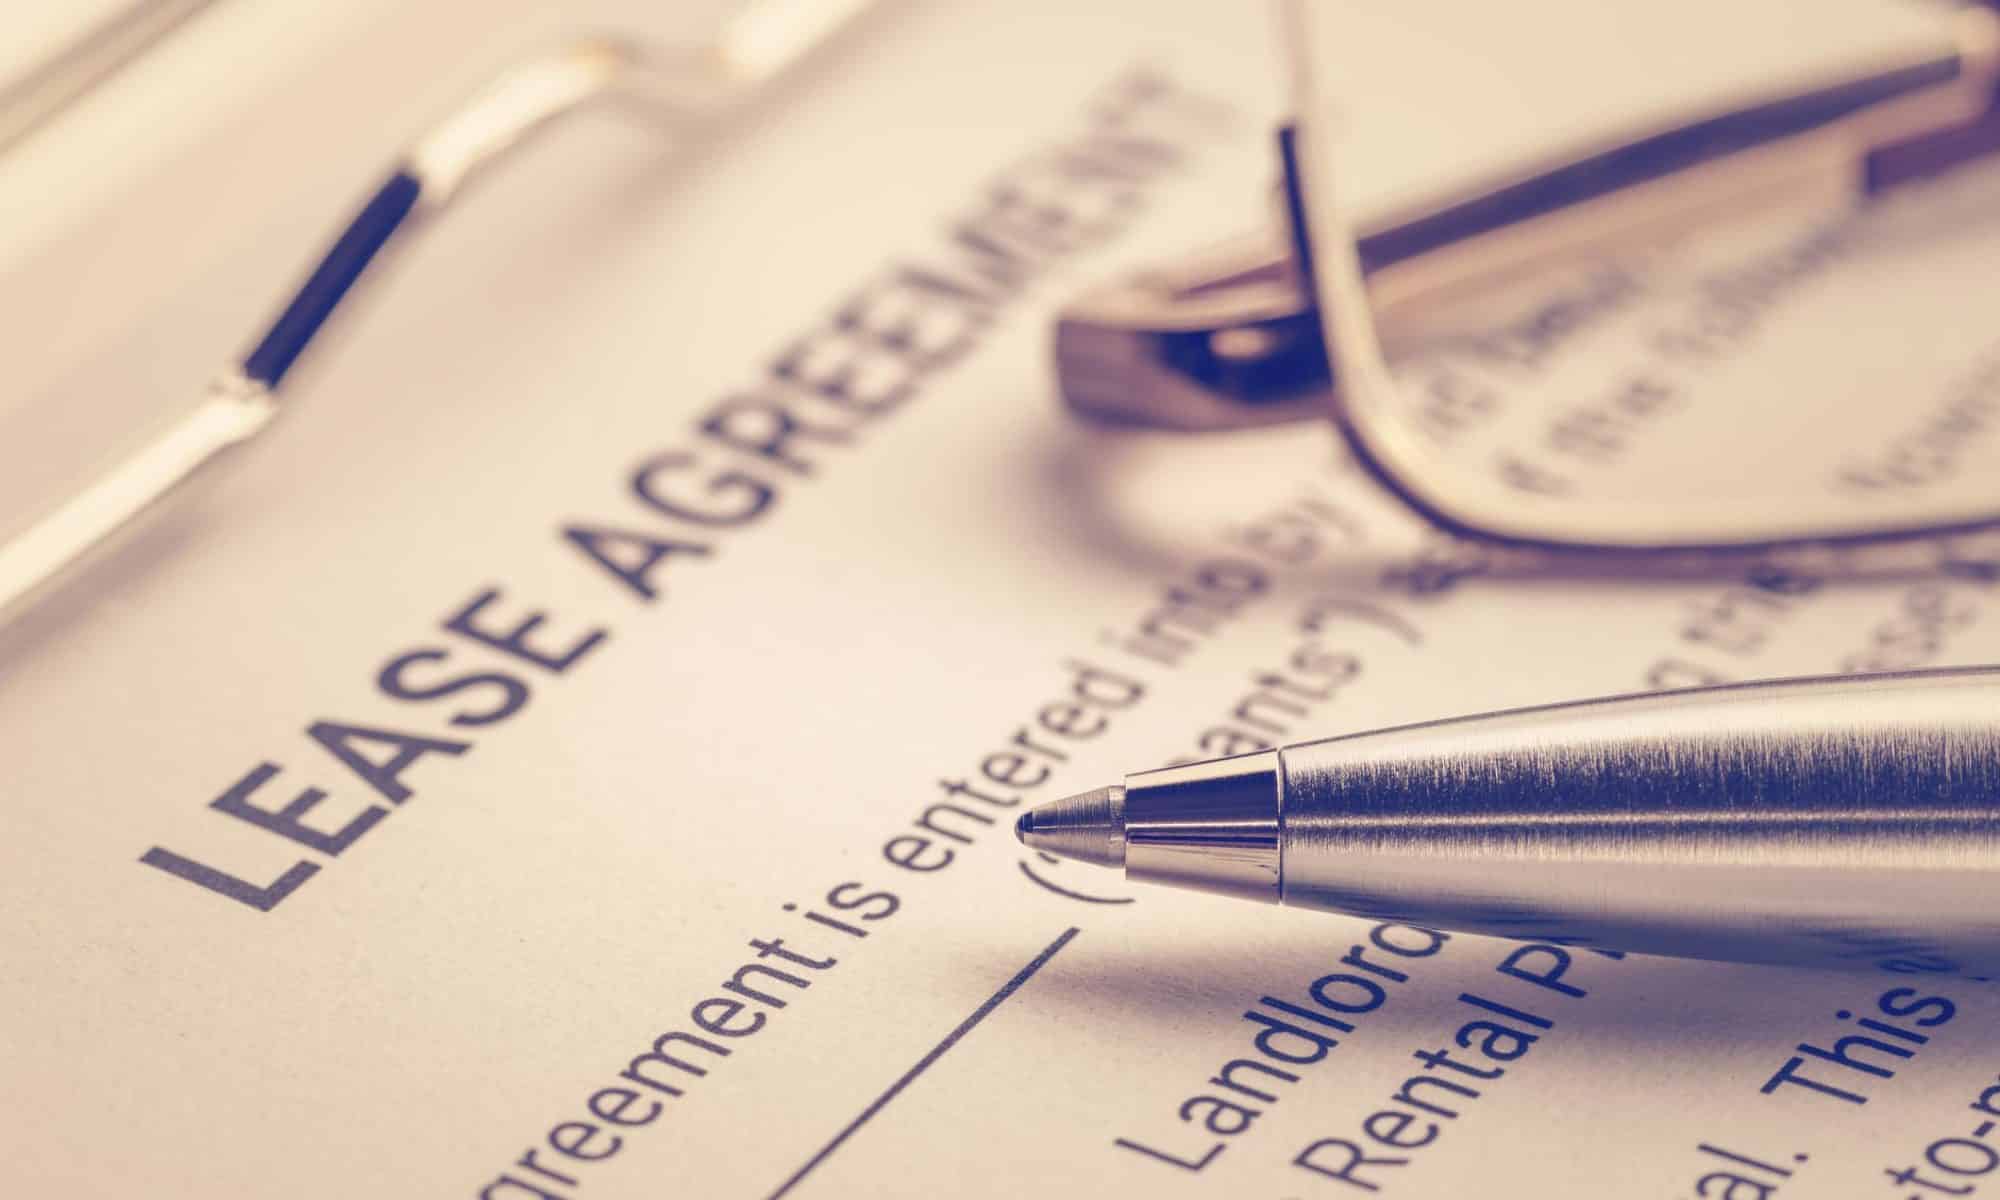 8 Critical Terms to Include in Your Lease Agreements | Fell Law Firm | iStock-1025416712